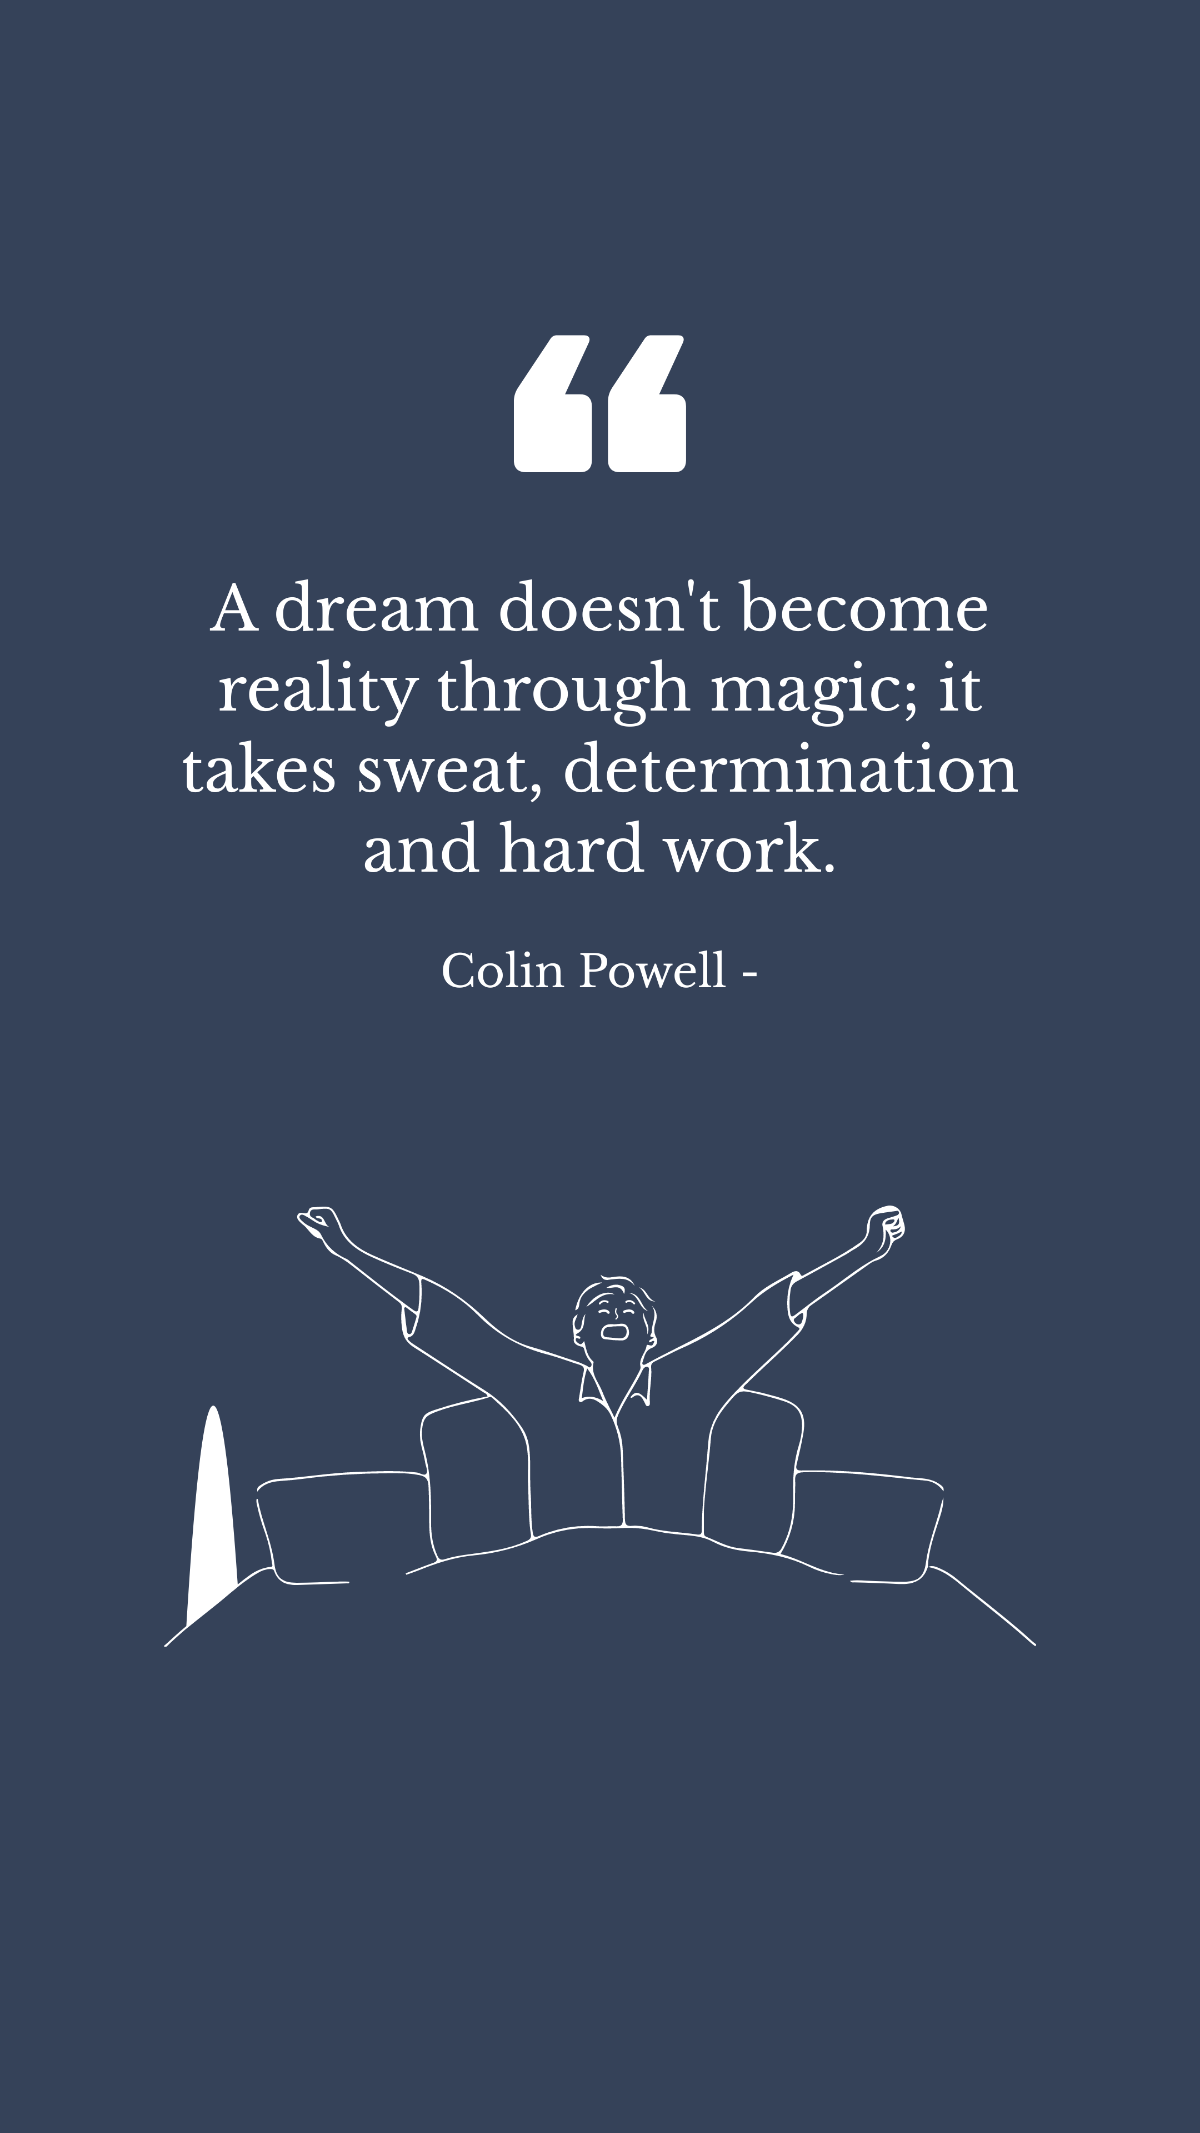 Free Colin Powell - A dream doesn't become reality through magic; it takes sweat, determination and hard work. Template